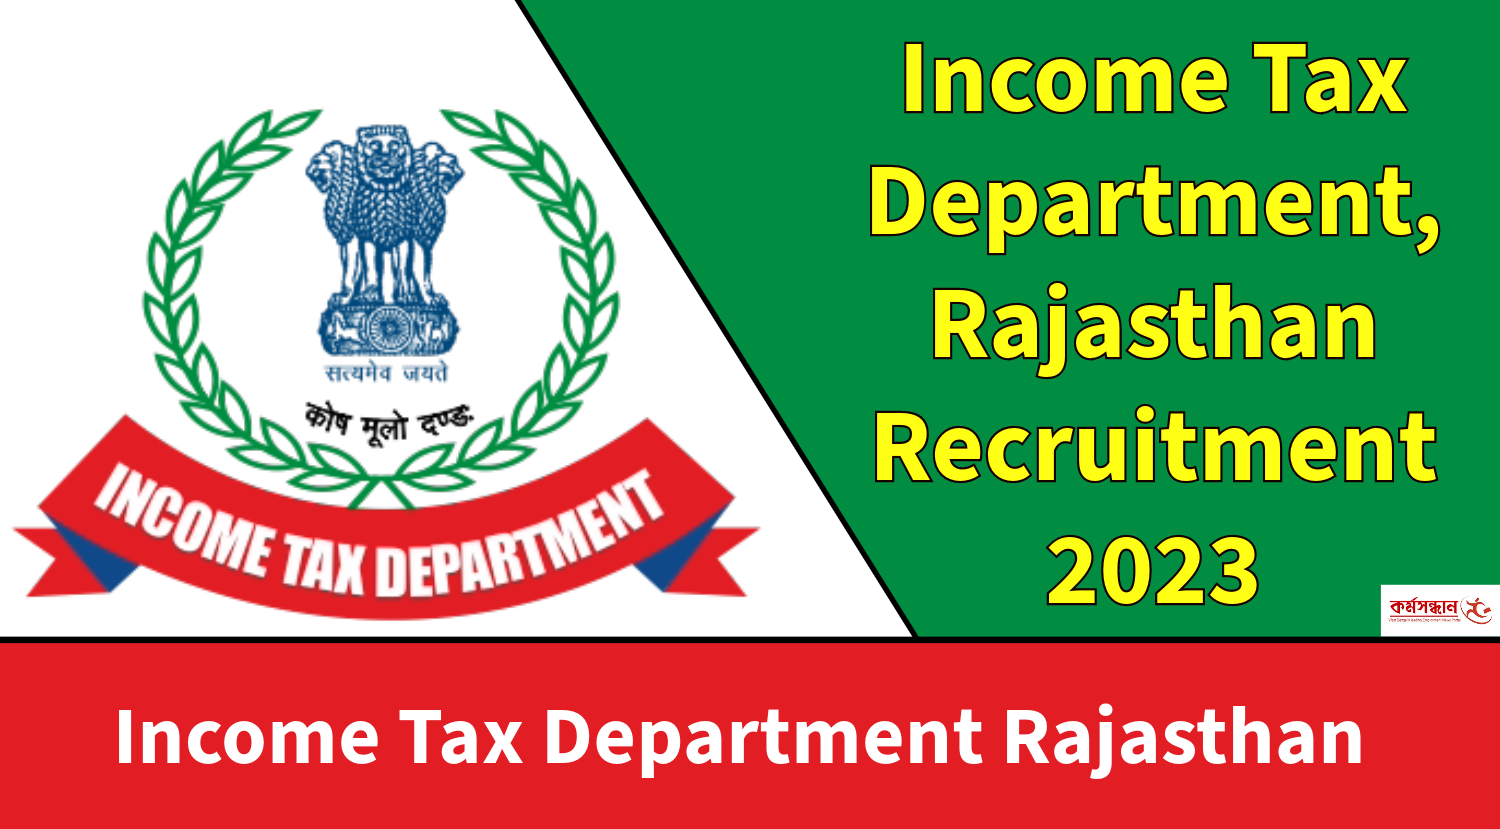 Vaibhav Pratap Jain - Deputy Commissioner of Income Tax - Central Board Of  Direct Taxes | LinkedIn